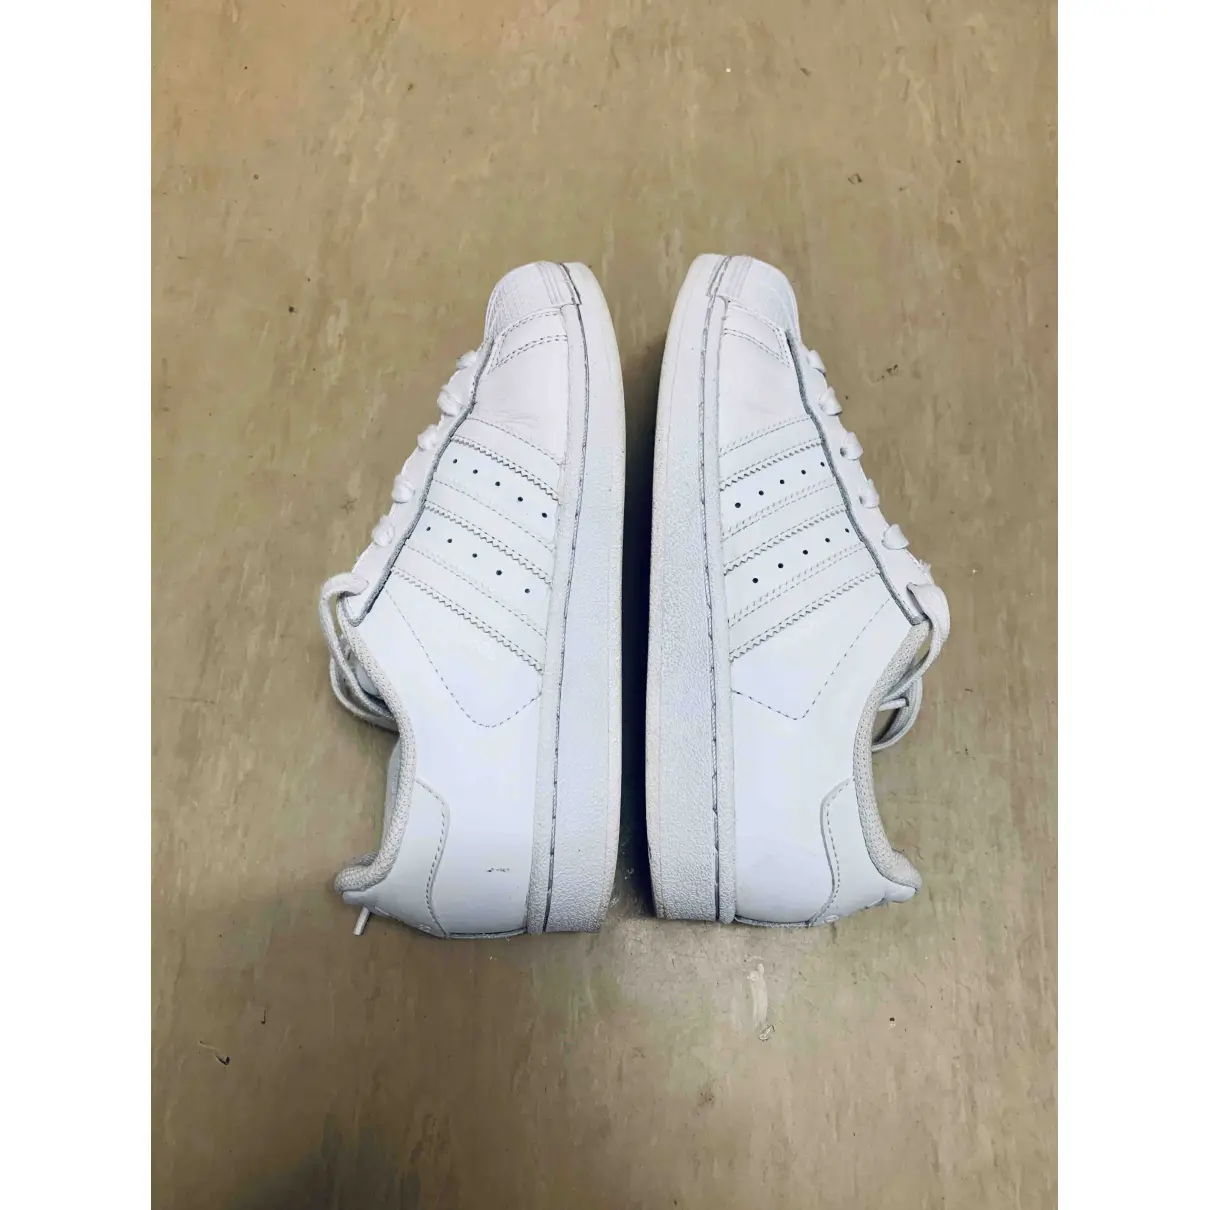 Buy Adidas Leather trainers online